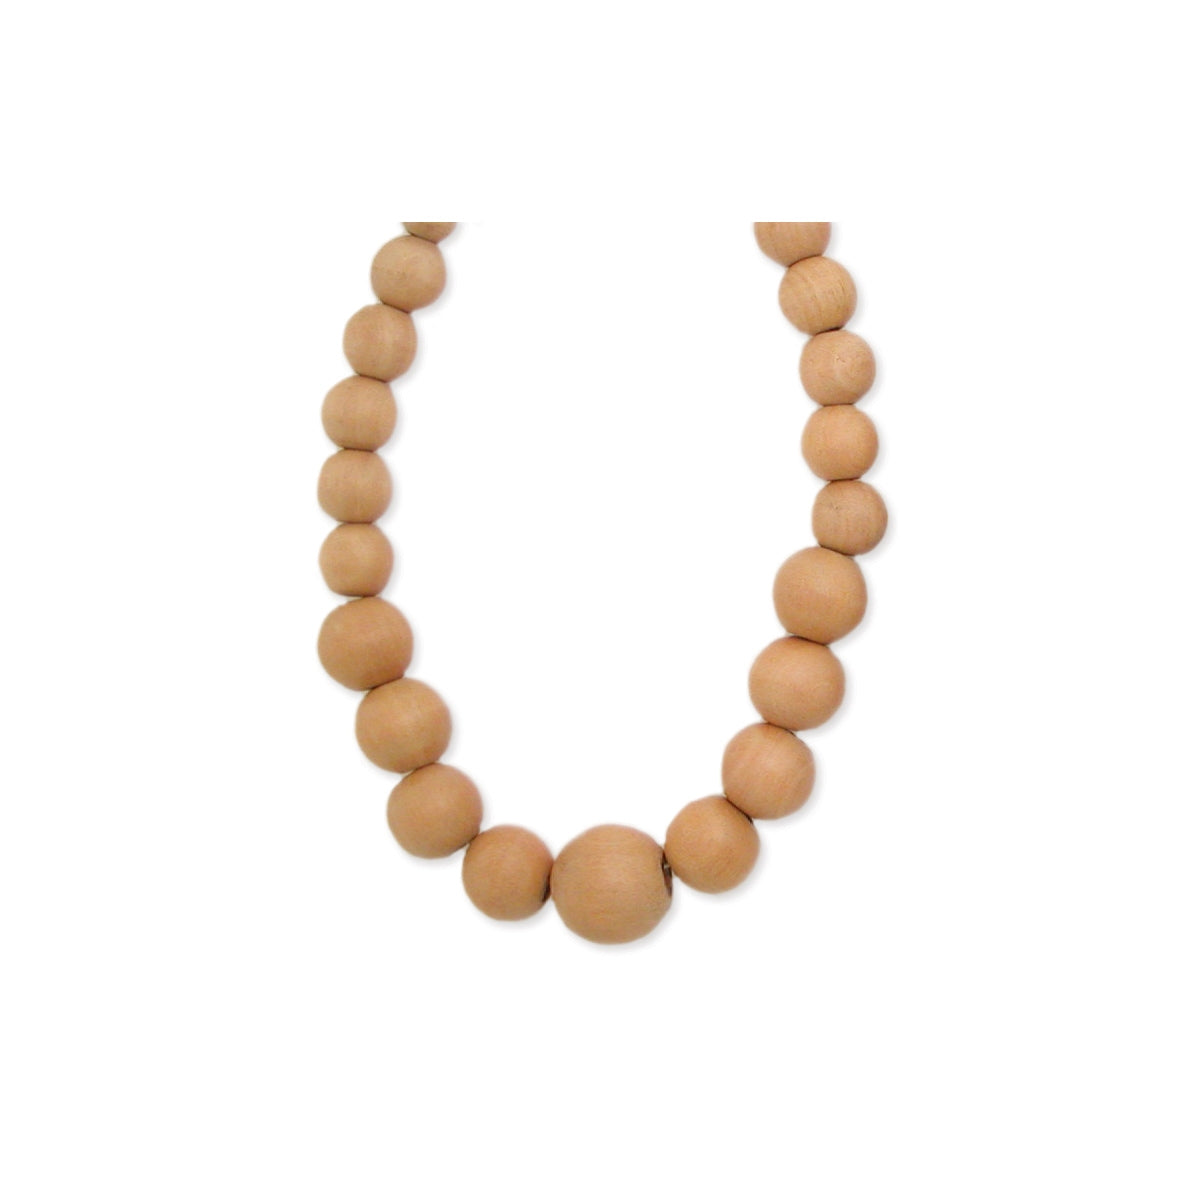 22" - 24" graduated light colored wood bead strand with an adjustable bronze tone metal chain and lobster claw clasp